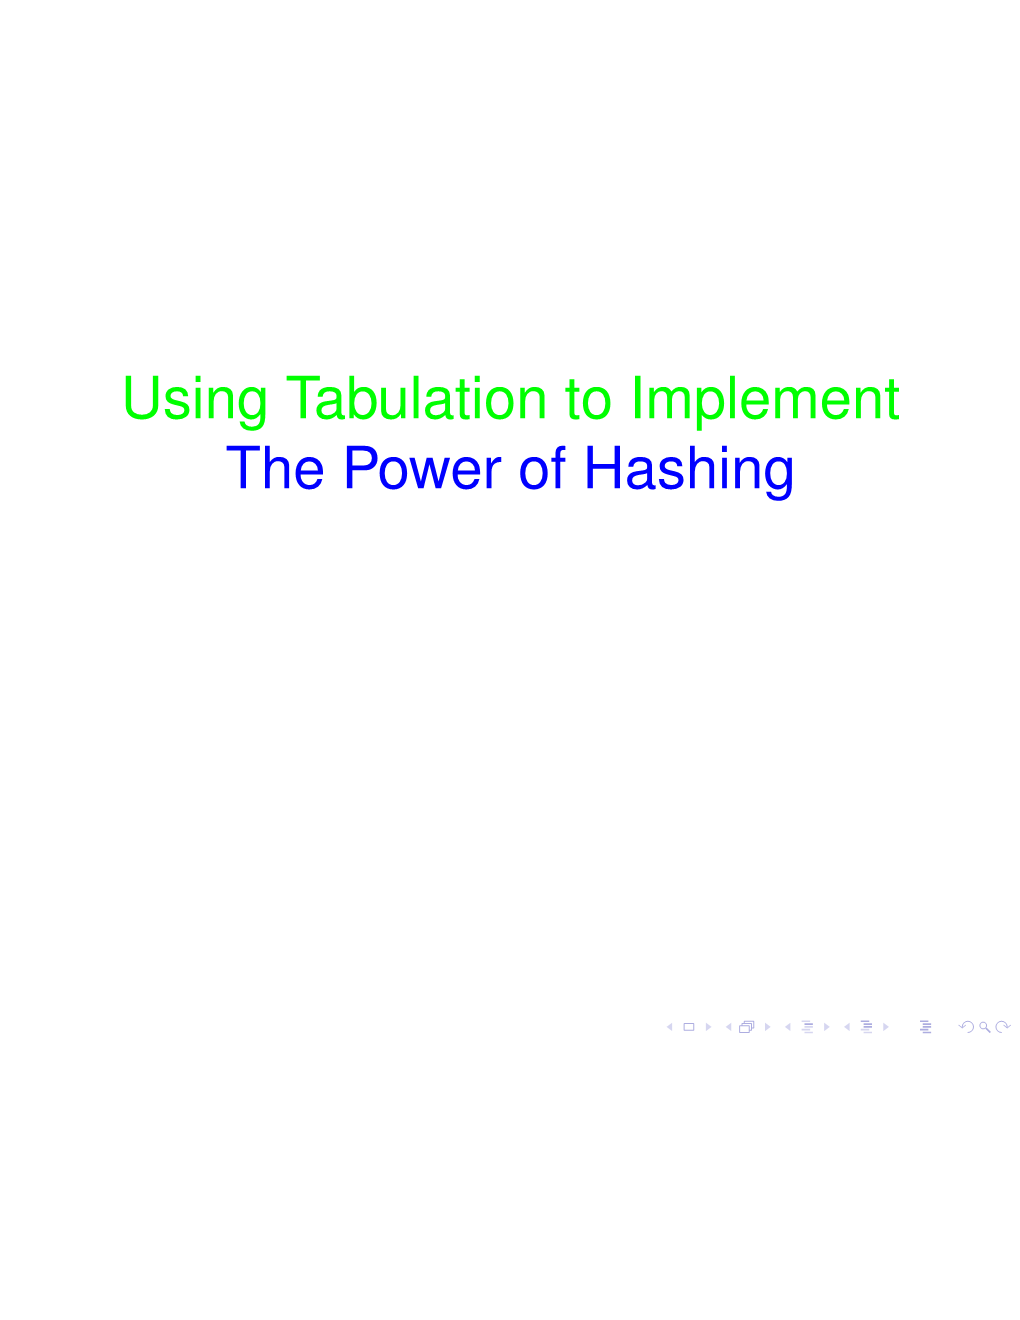 Using Tabulation to Implement the Power of Hashing Using Tabulation to Implement the Power of Hashing Talk Surveys Results from I M